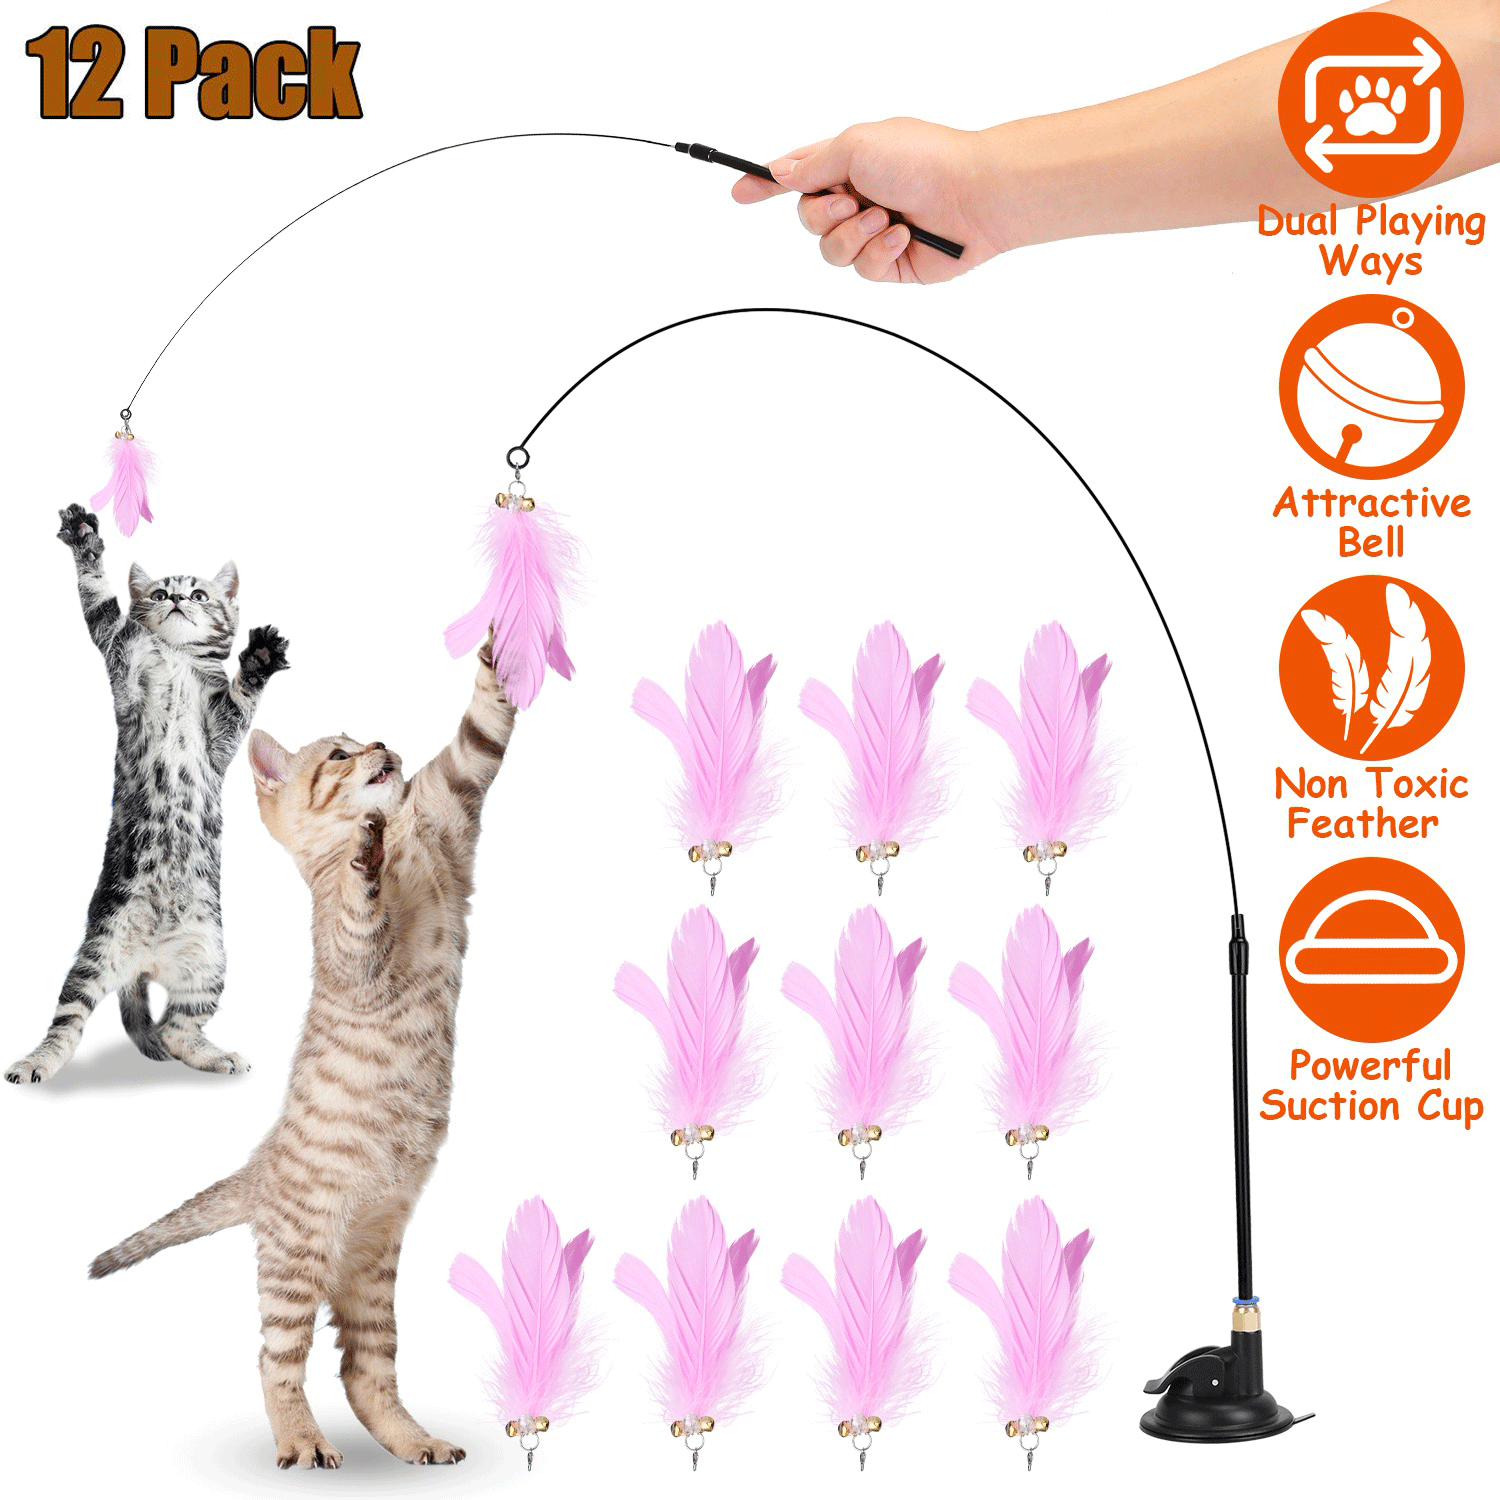 Pet Cat Toys Feather Wand Rod Pet Kitty Bell Play Teaser Interactive Toy + Bell Unbranded Does not apply